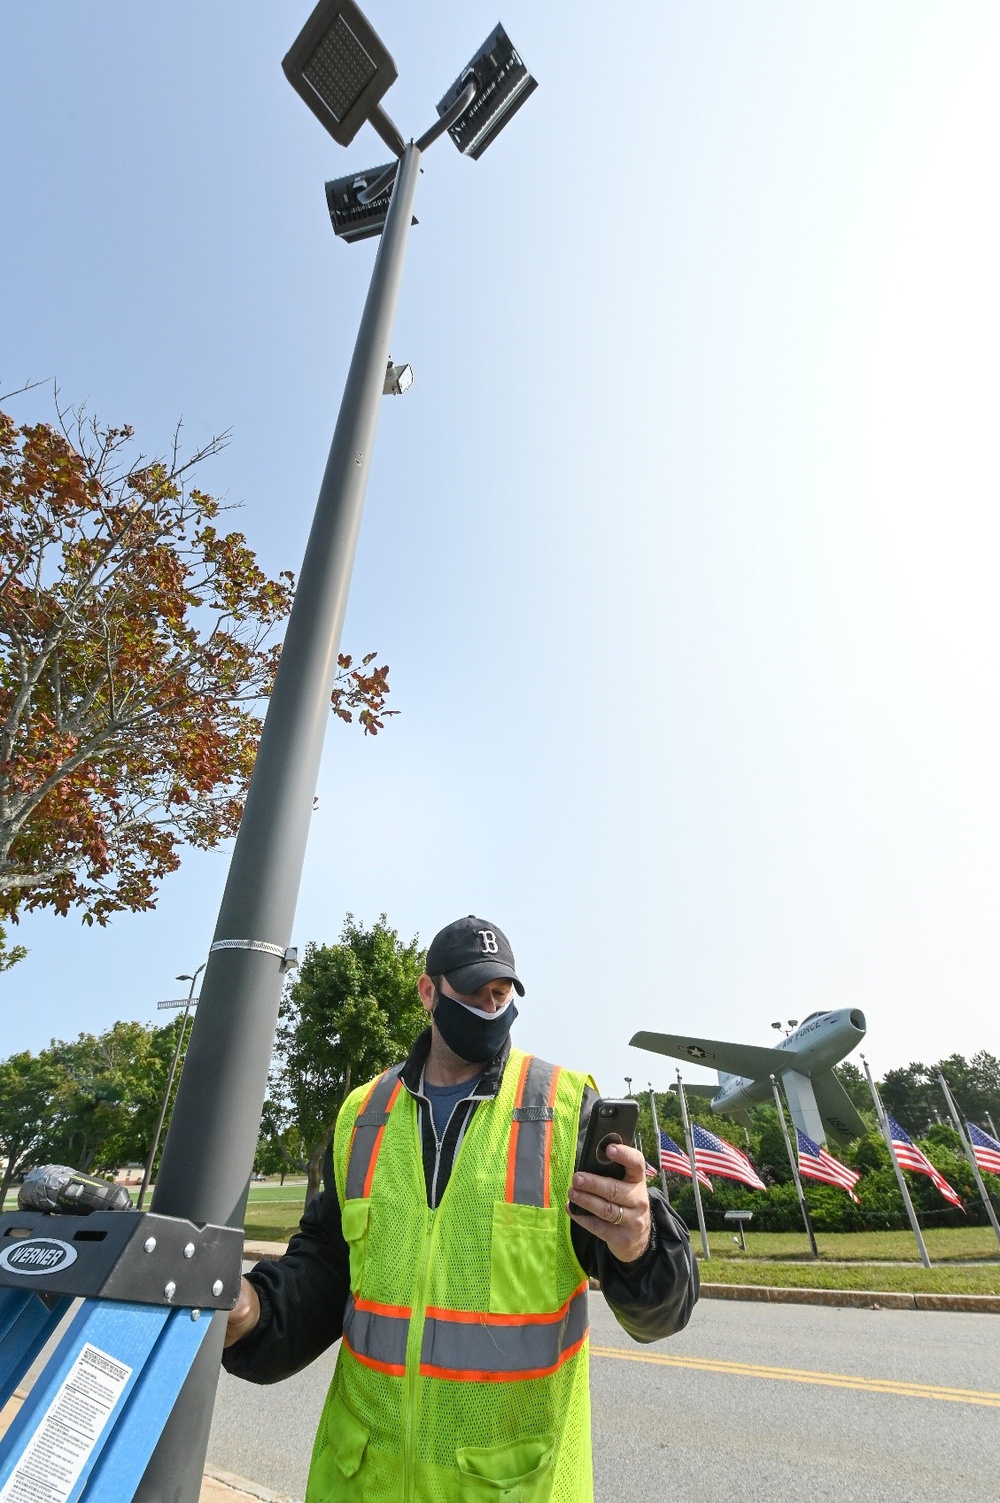 SFS, CE to evaluate environmental impact with traffic cameras